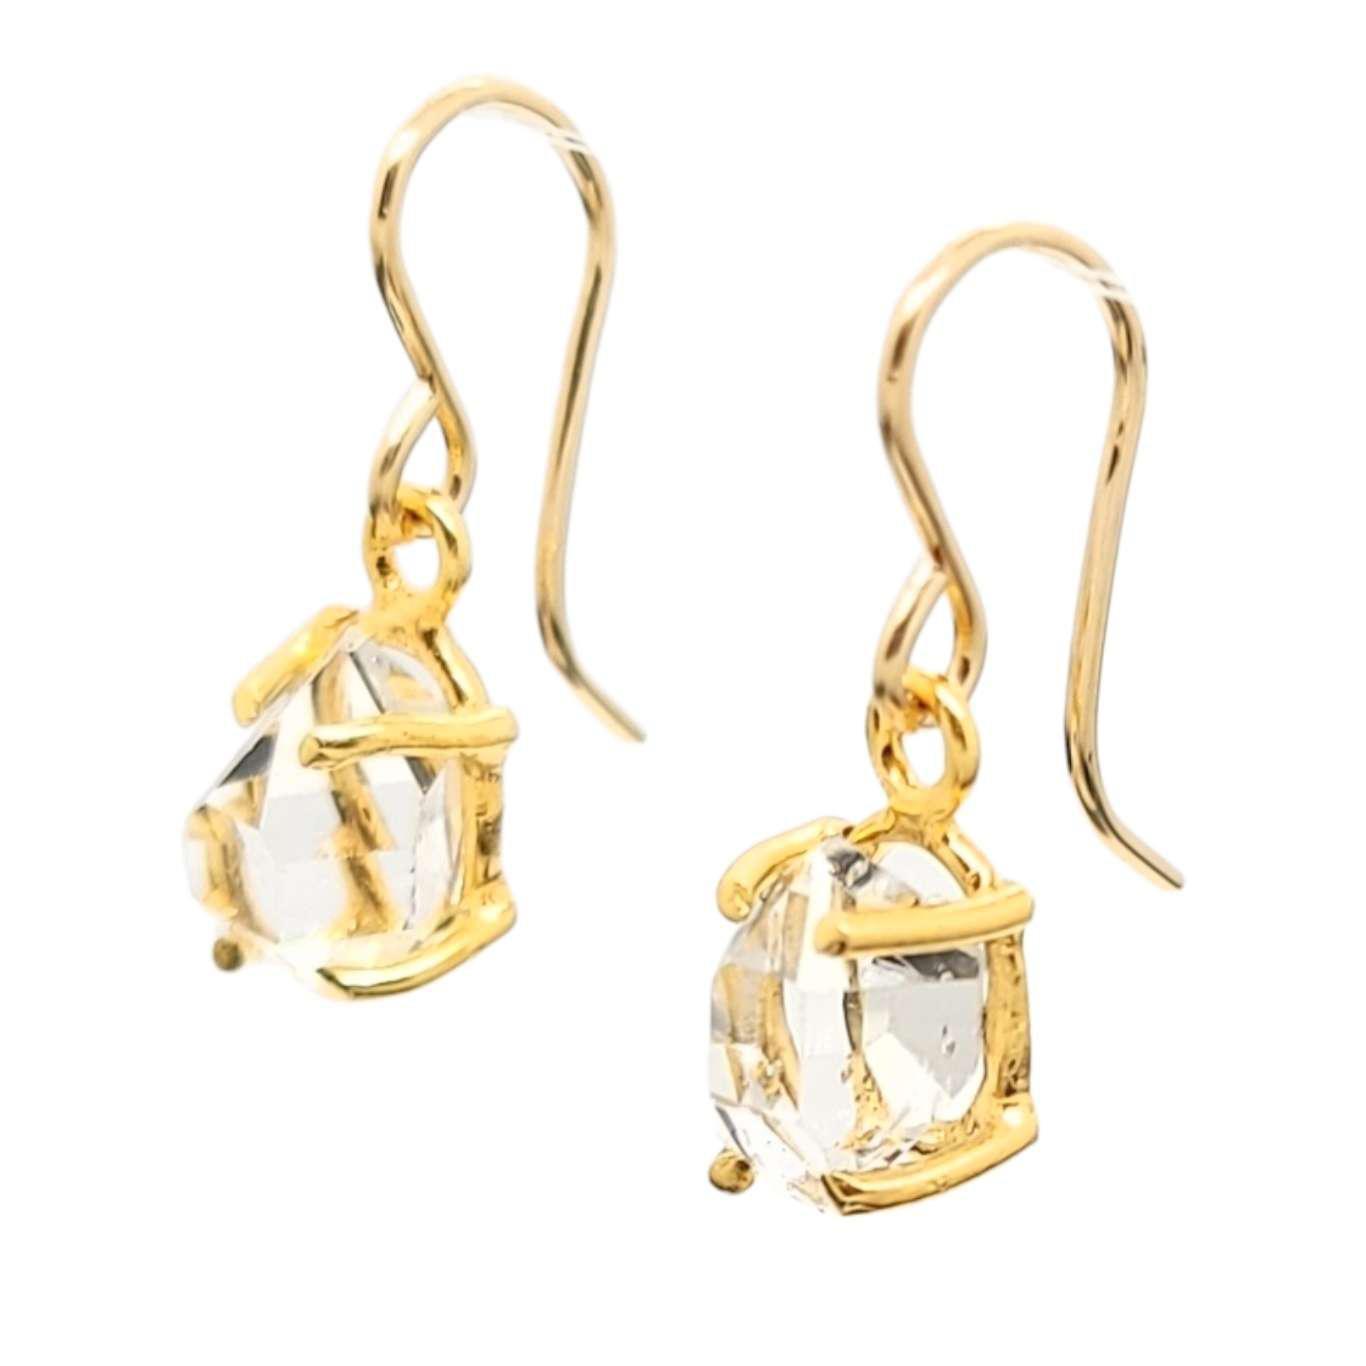 Earrings - Classic Herkimer Drops in Yellow Gold Vermeil by Storica Studio